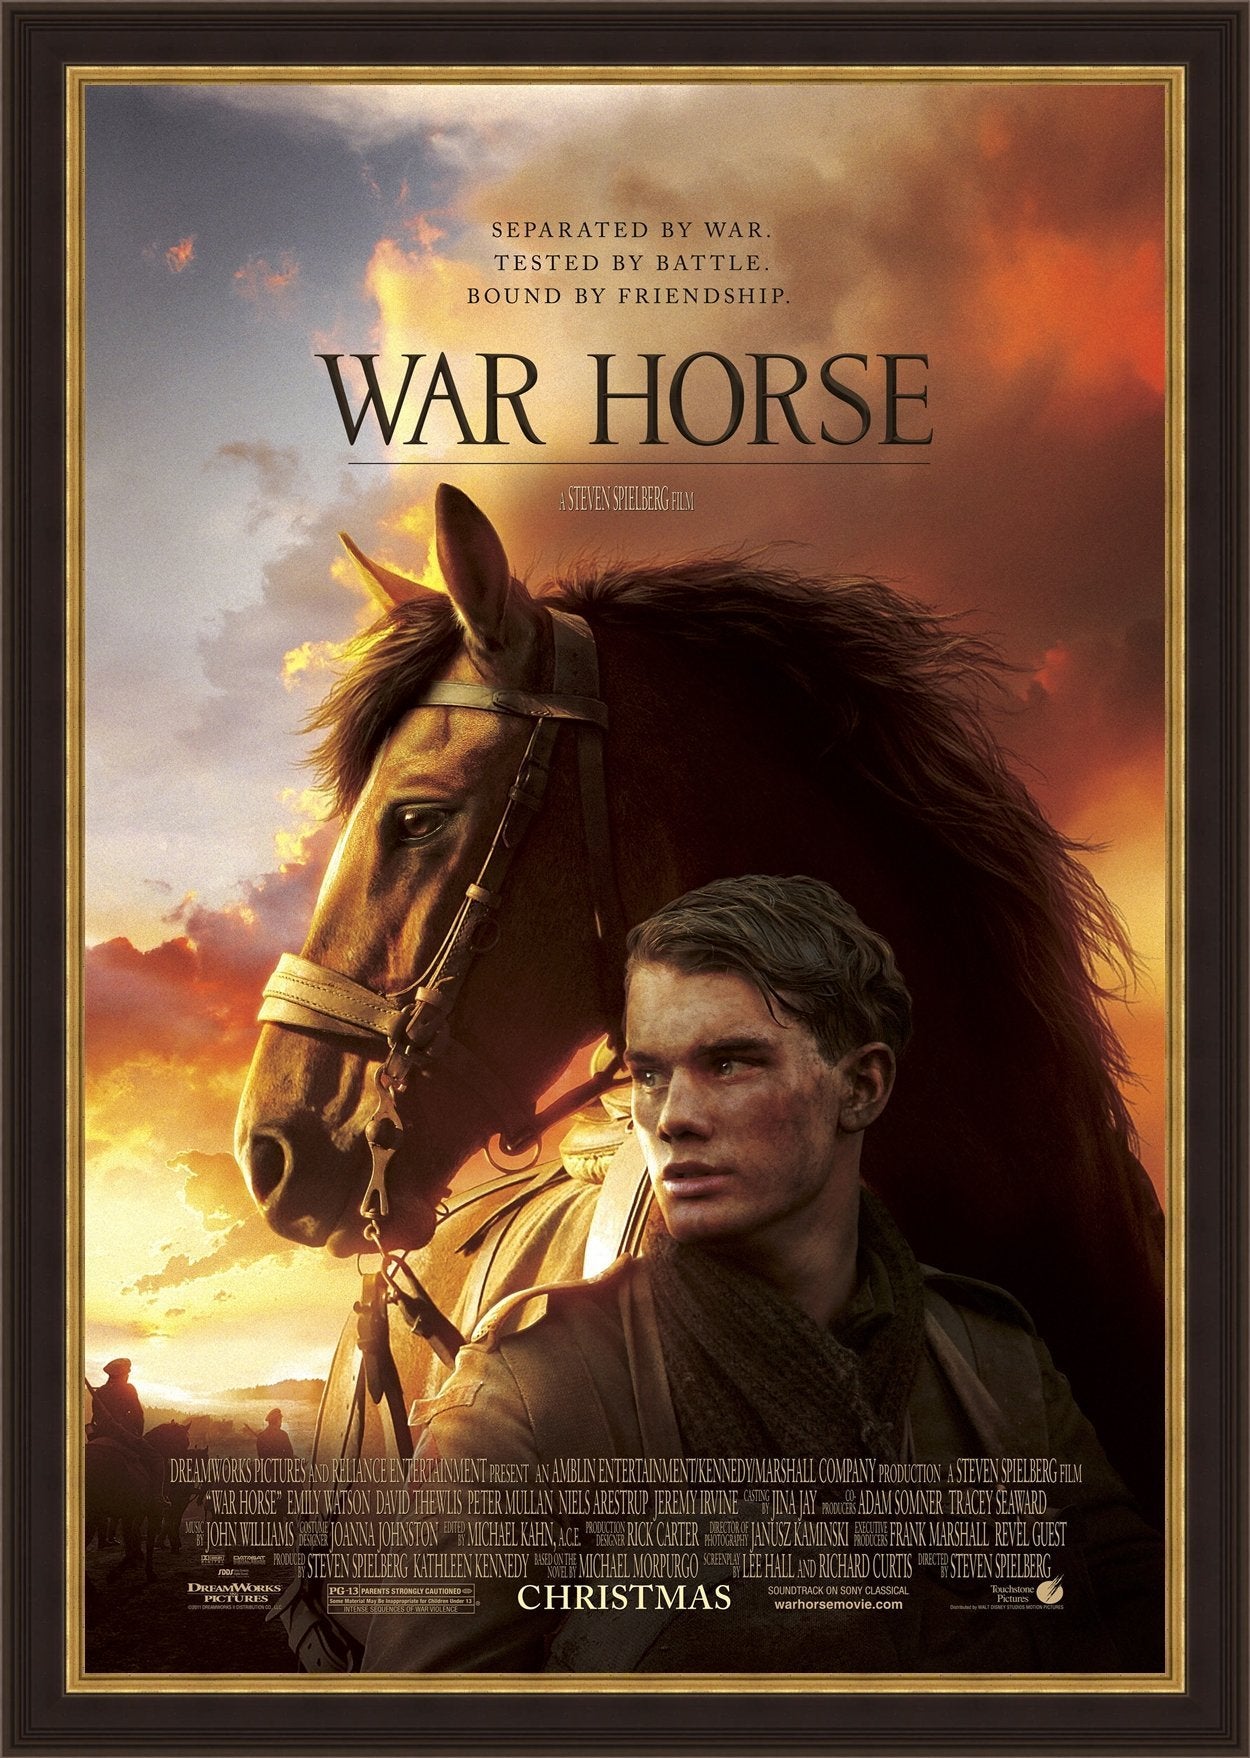 An original movie poster for the film War Horse